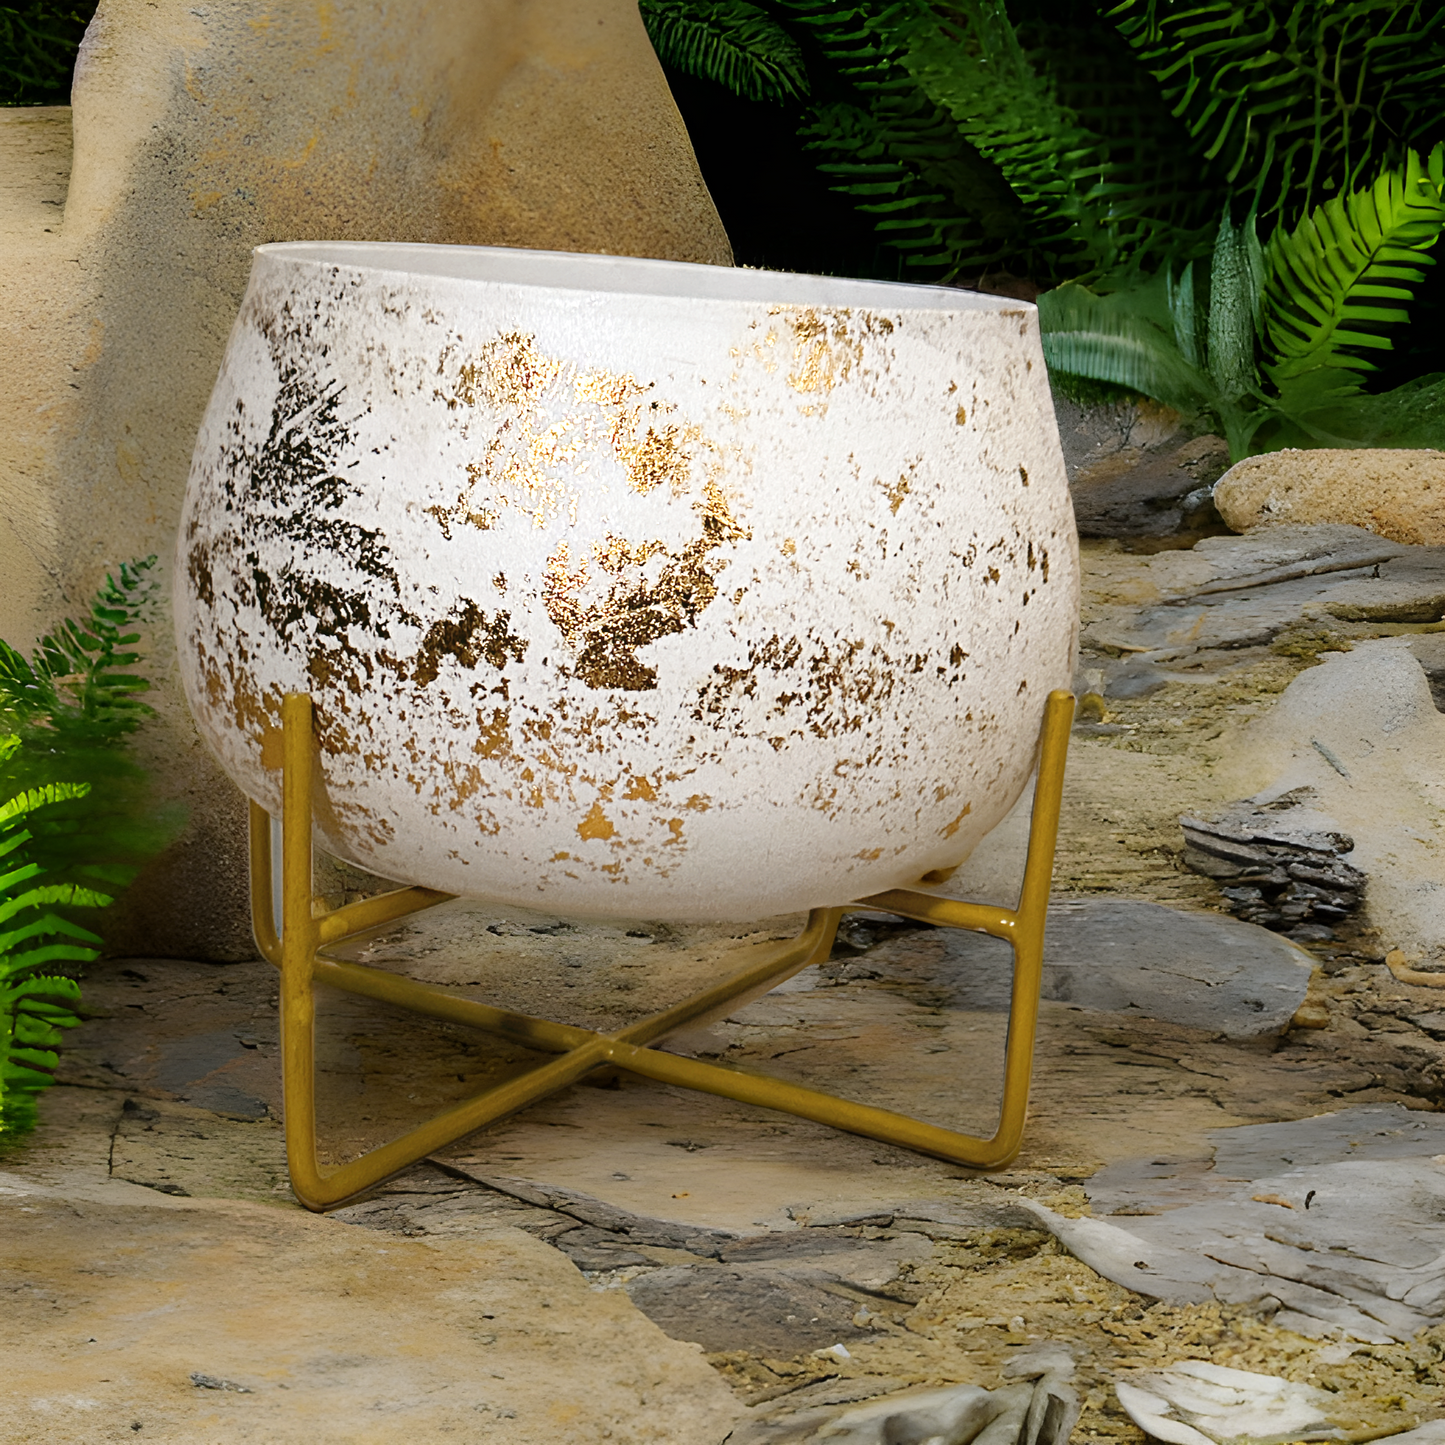 Big Powder coated Metal Pot with Stand | White with Golden finish